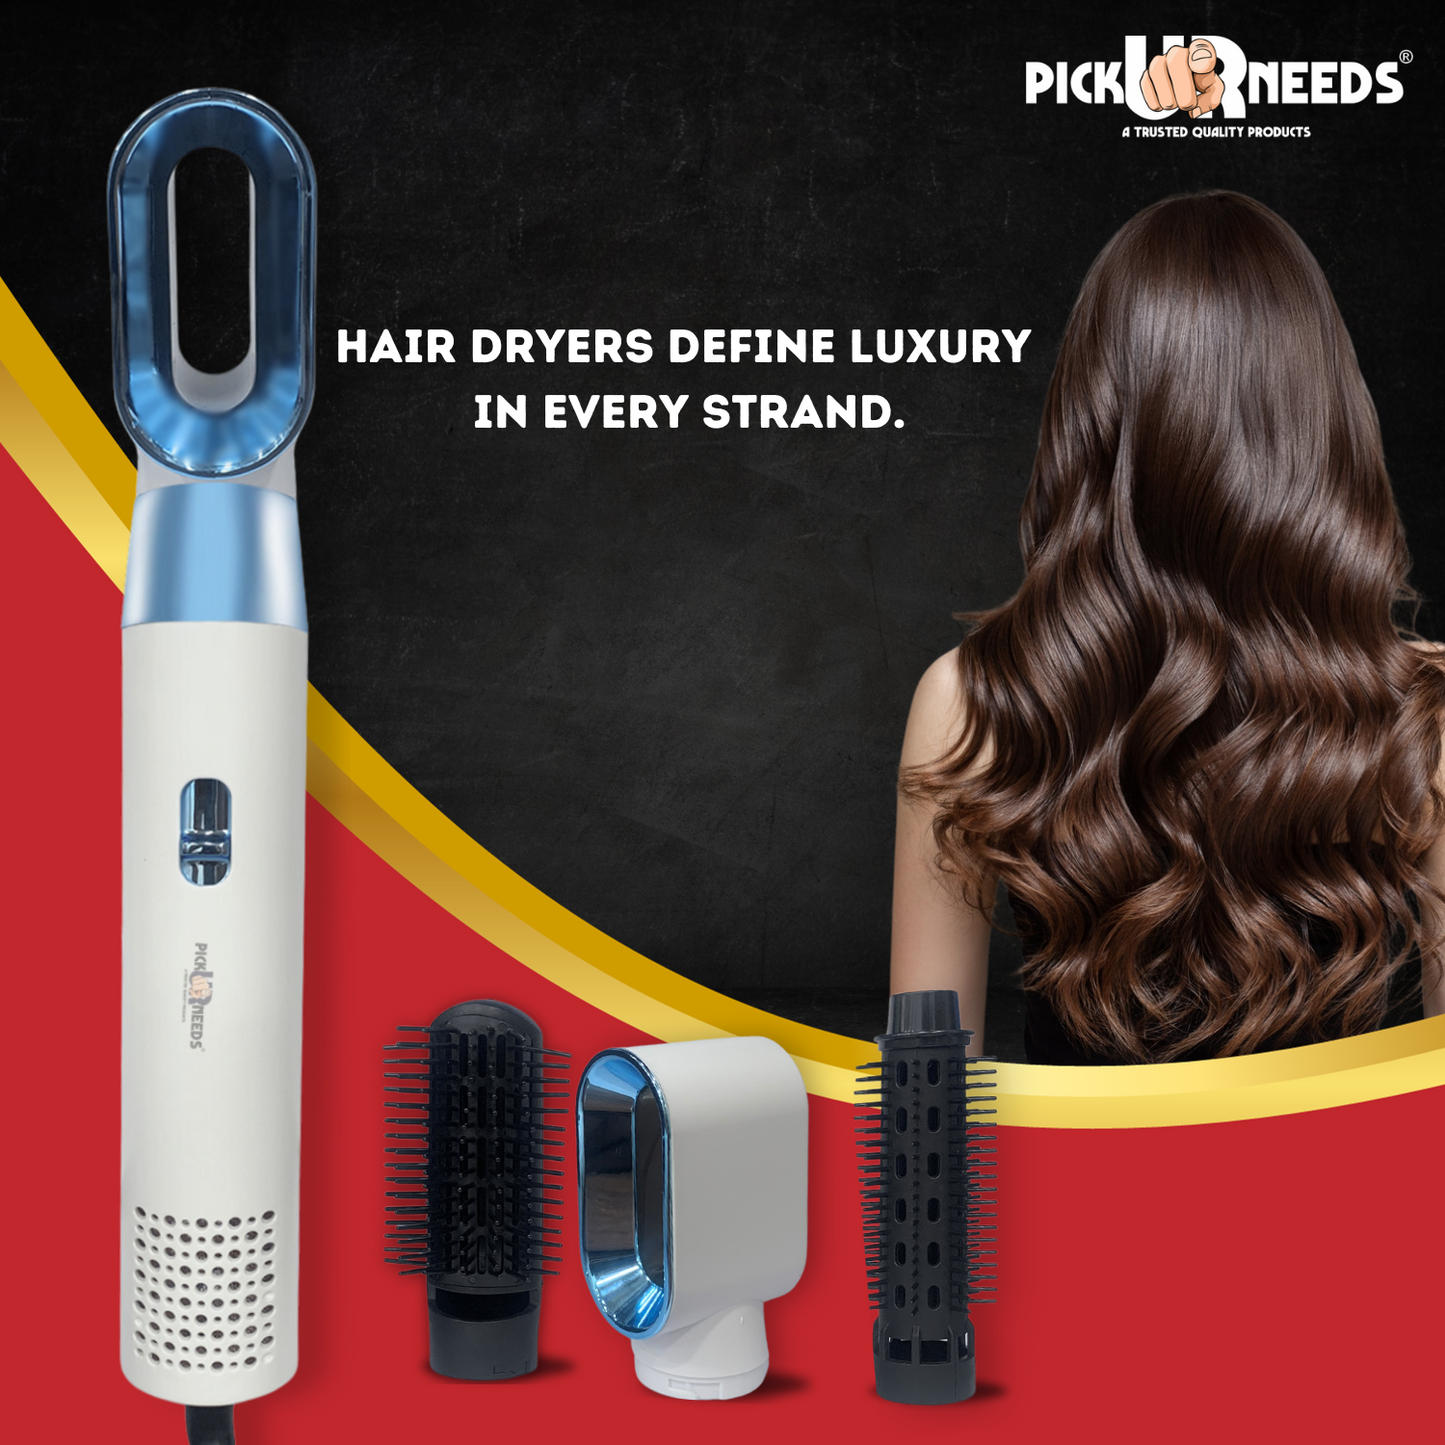 Pick Ur Needs Professional 3 in 1 Hair Dryer For Men & Women With Hair Comb + Blower